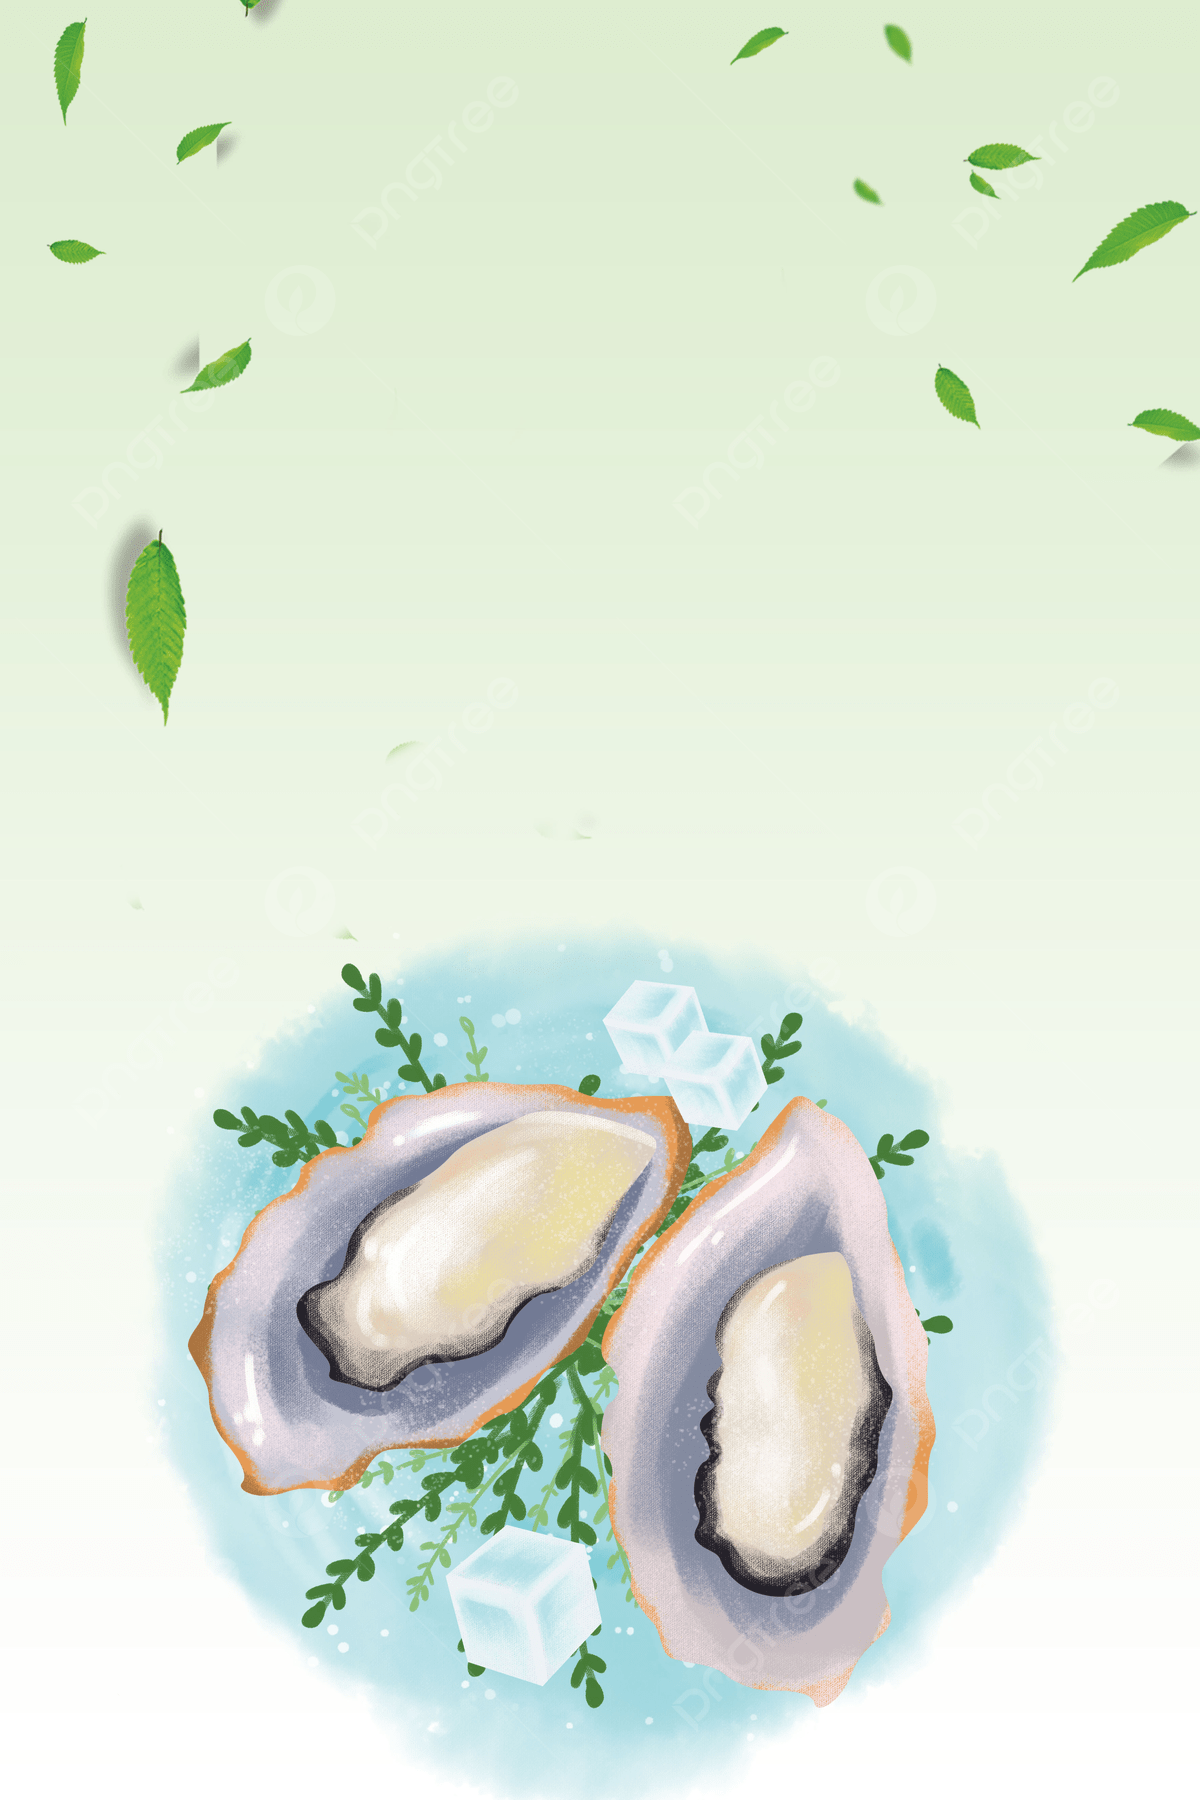 Oyster Wall Art Free Download 1200x1800